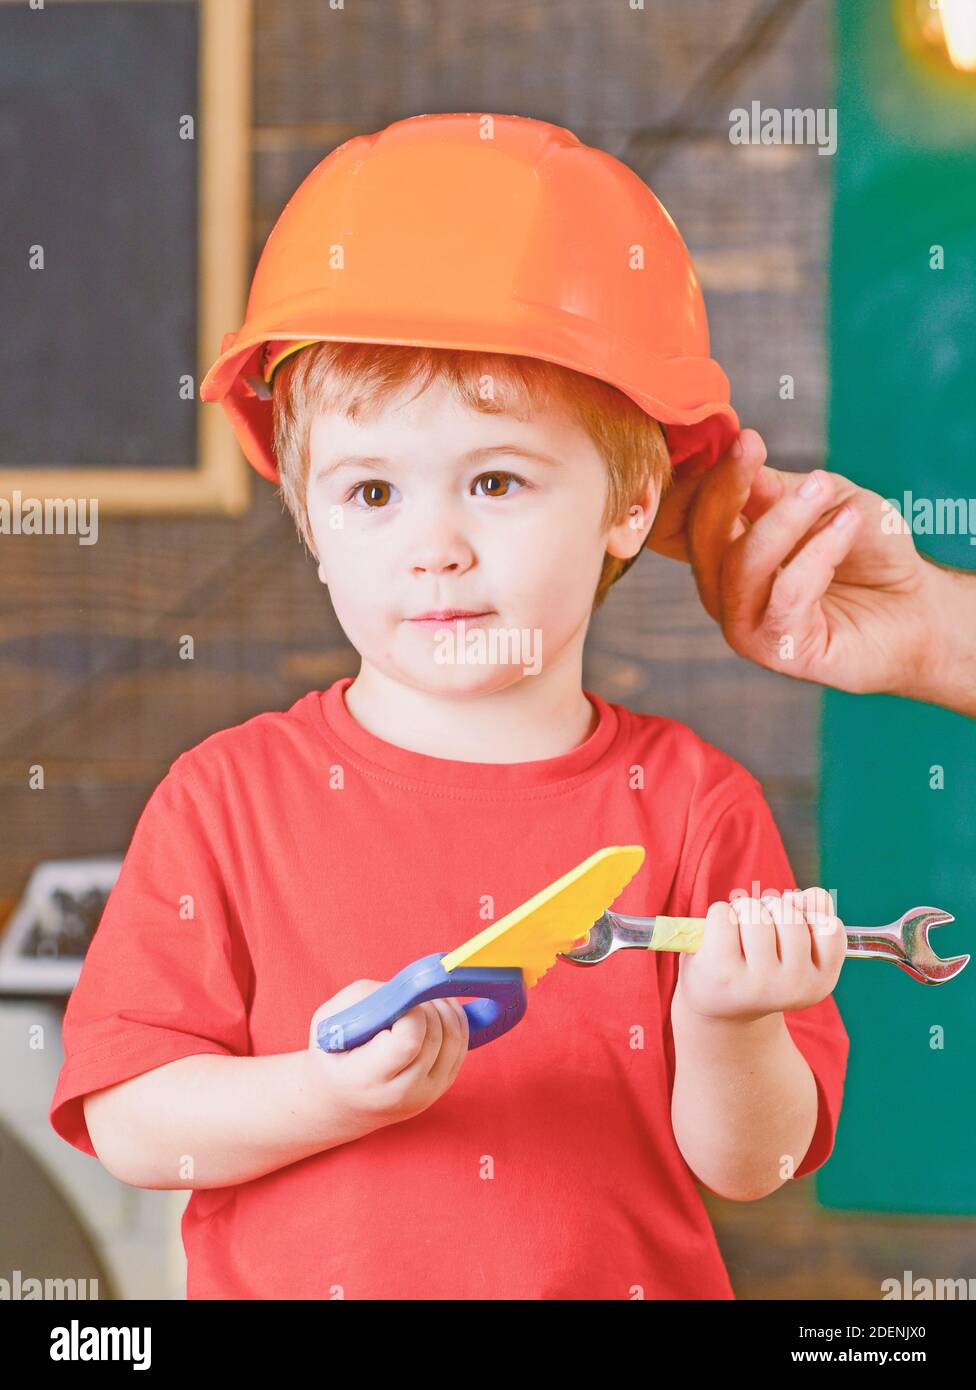 Educational game concept. Kid playing with toy tools. Male hand holding orange protective helmet. Stock Photo